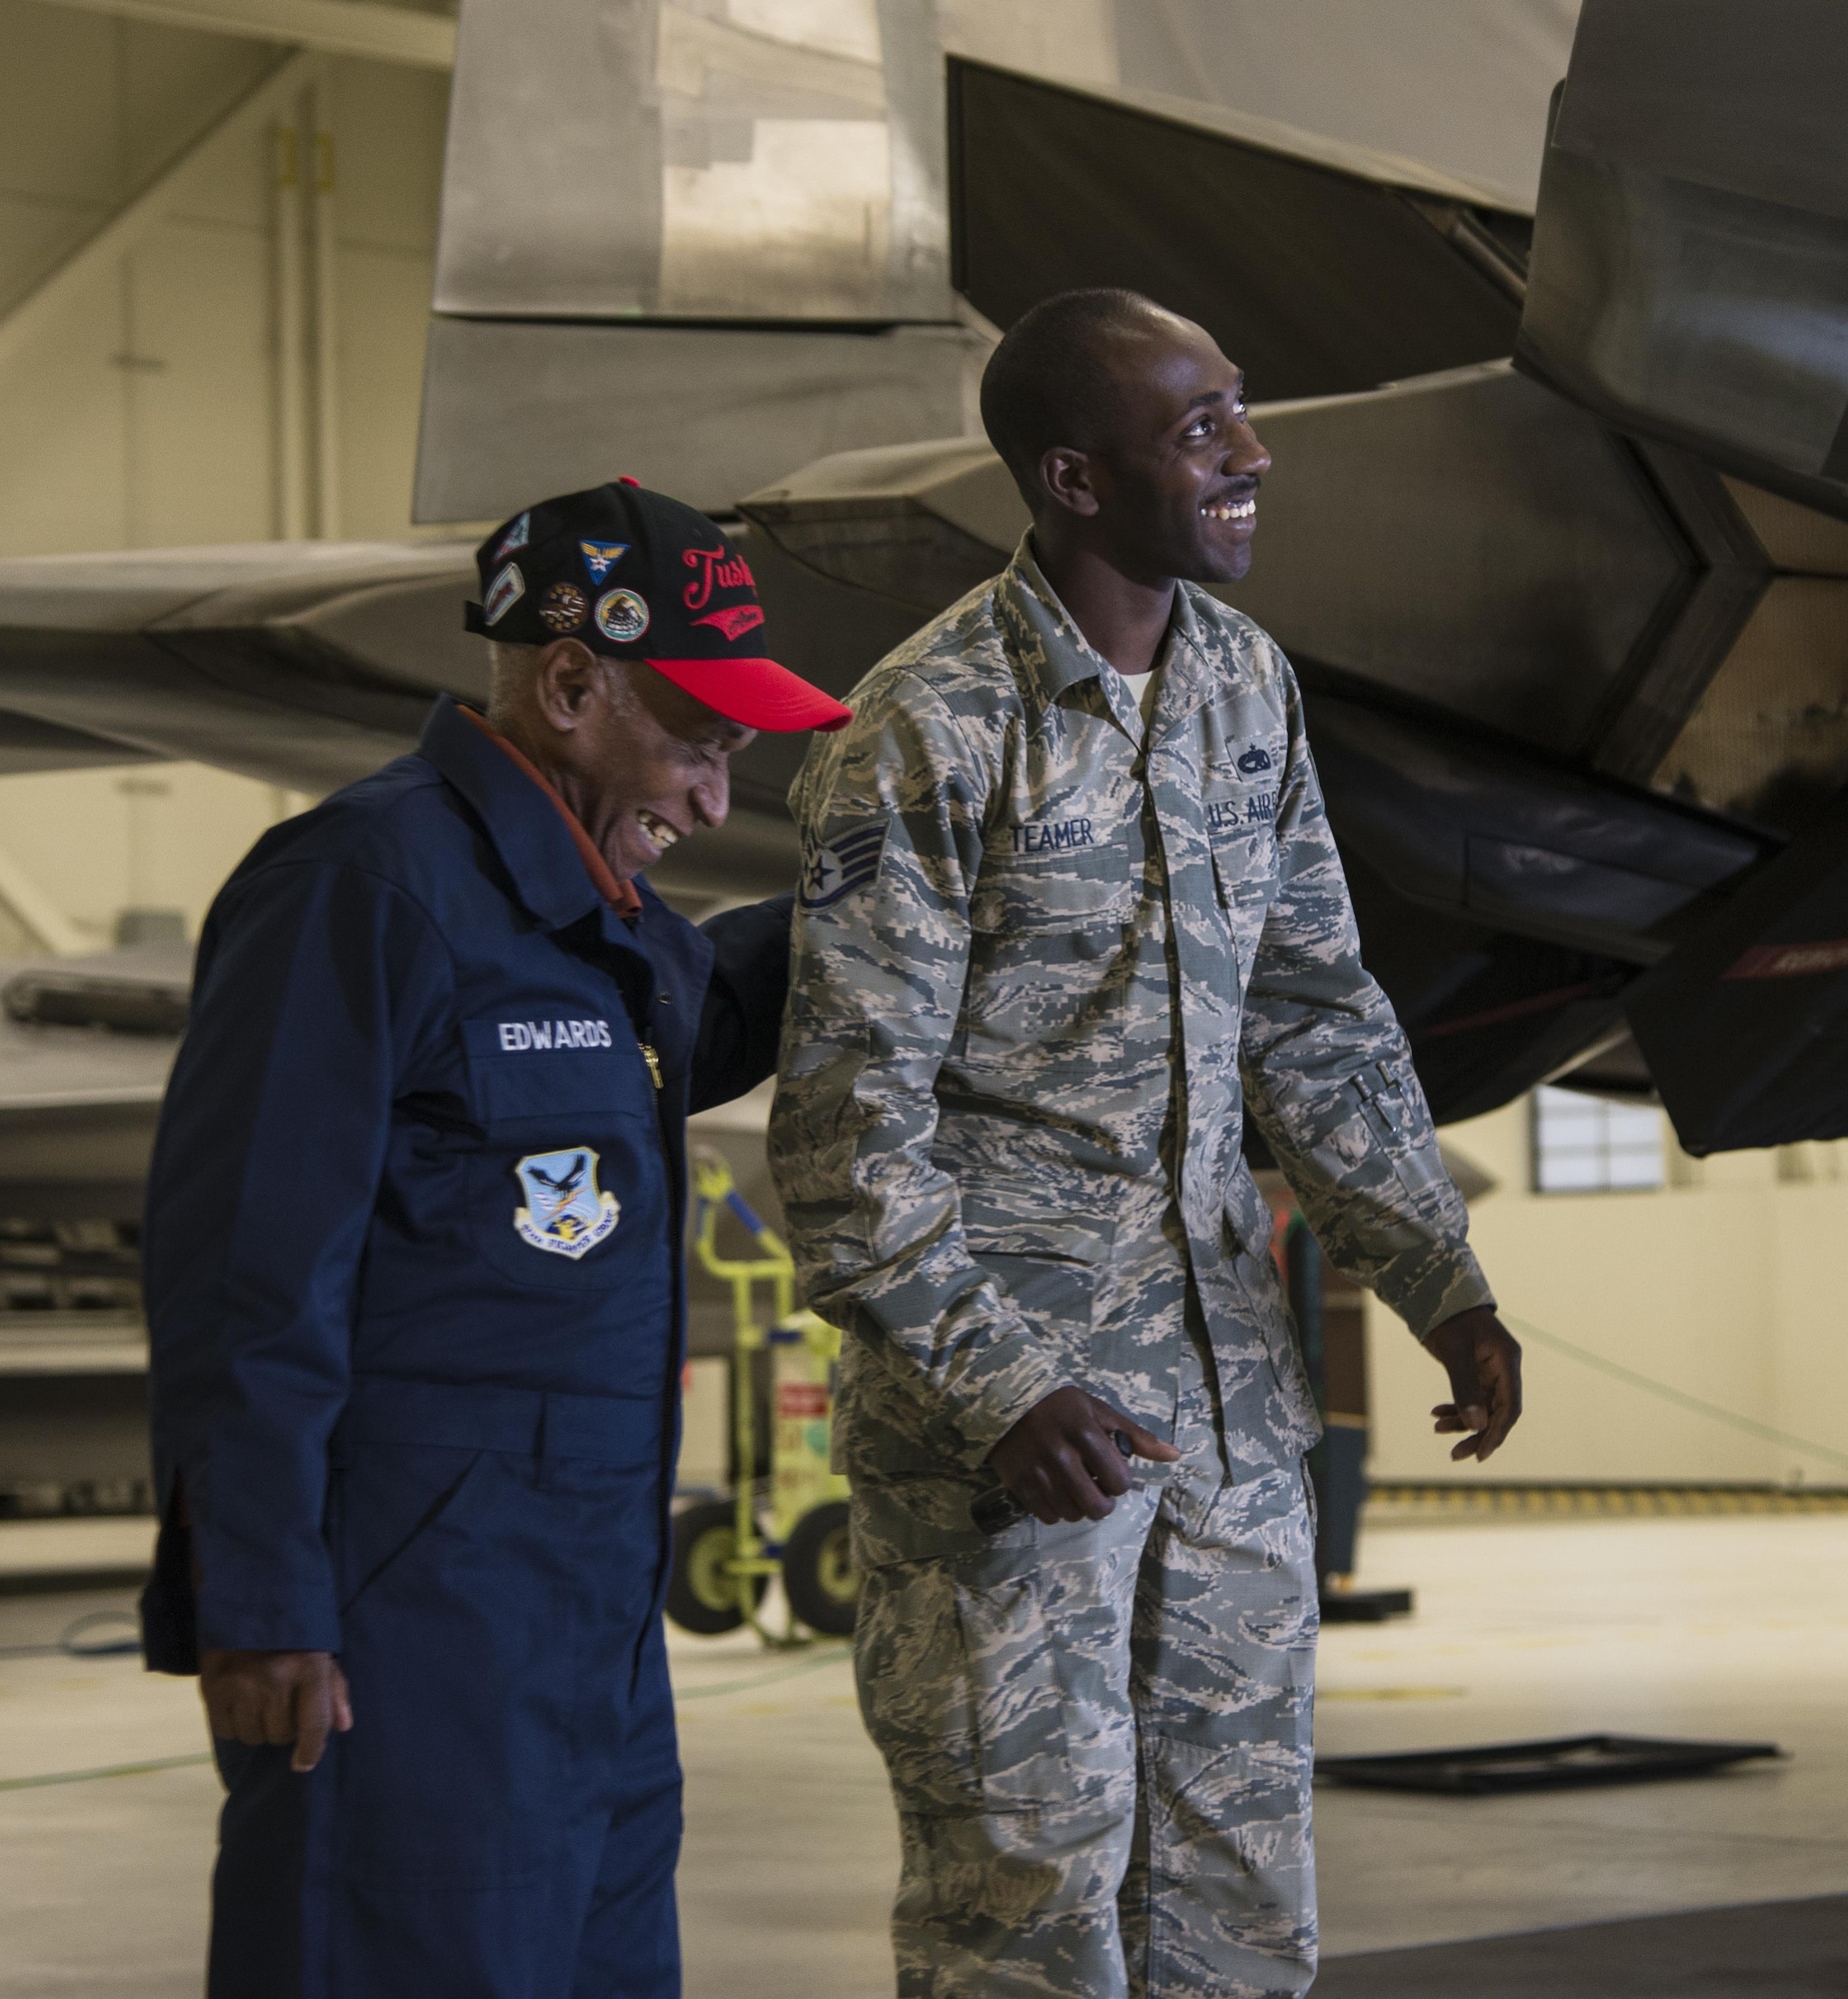 U.S. Army Air Corps Staff Sgt. Leslie Edwards, the last known living Tuskegee Airman of the 477th Bombardment Group, shares a moment with U.S. Air Force Staff Sgt. Stephen Teamer, 477th Aircraft Maintenance Squadron crew chief, at Joint Base Elmendorf-Richardson, Alaska, Oct. 14, 2017. In 2007, the 477th Bombardment Group became the 477th Fighter Group, bringing with it the legacy of Tuskegee Airmen to Alaska. (U.S. Air Force photo by Senior Airman Curt Beach)